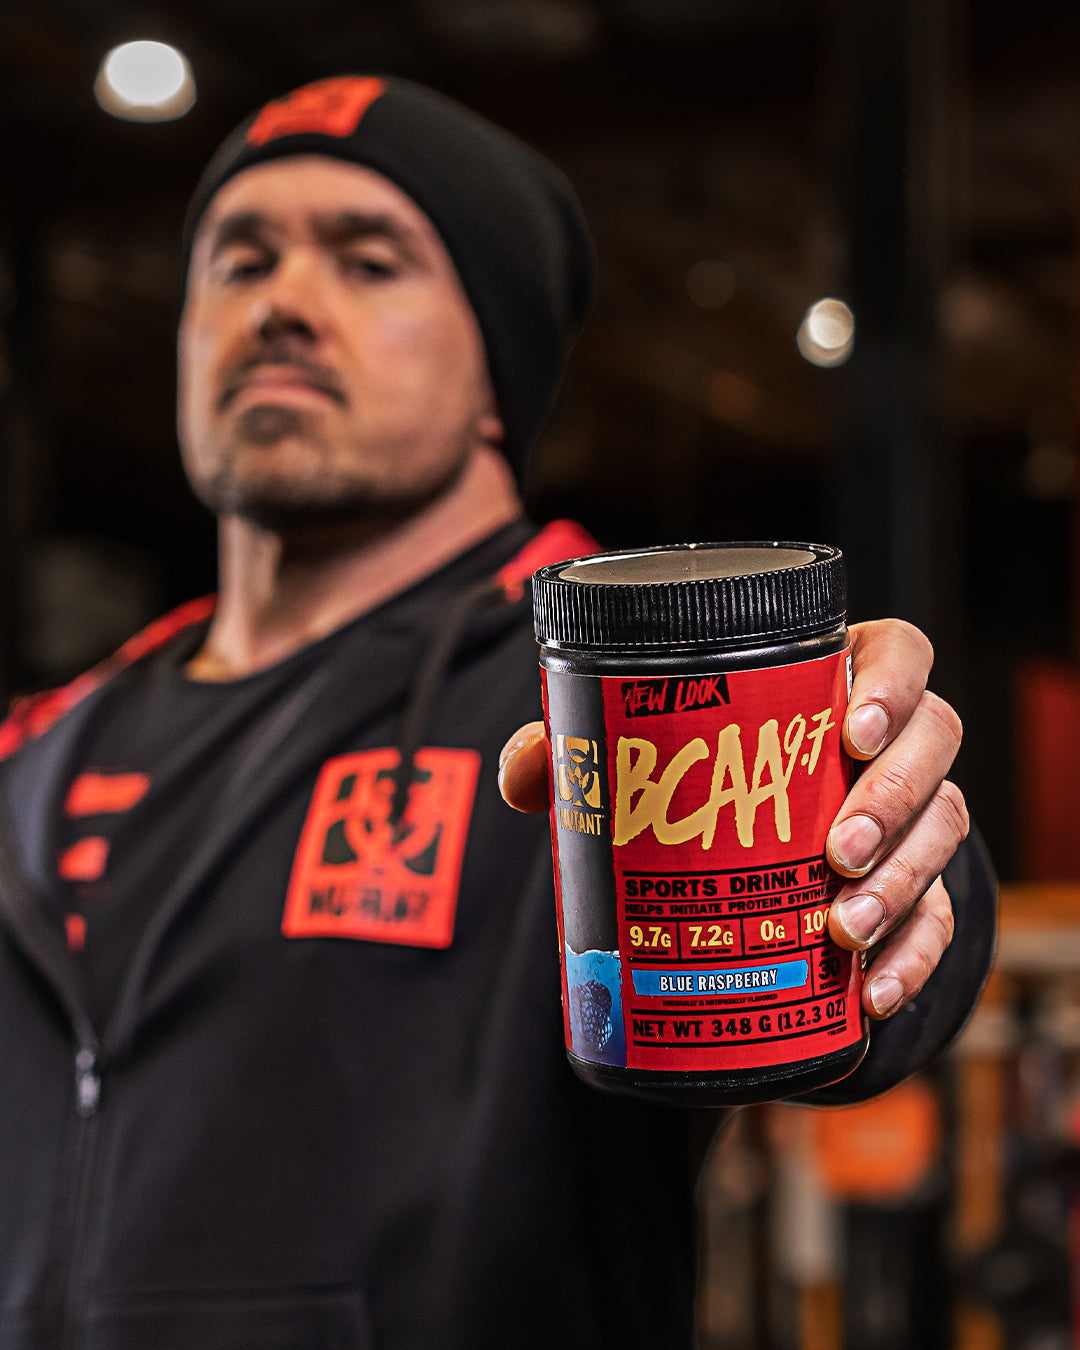 MUTANT BCAA 9.7® (30 Servings) - Sports Drink Mix